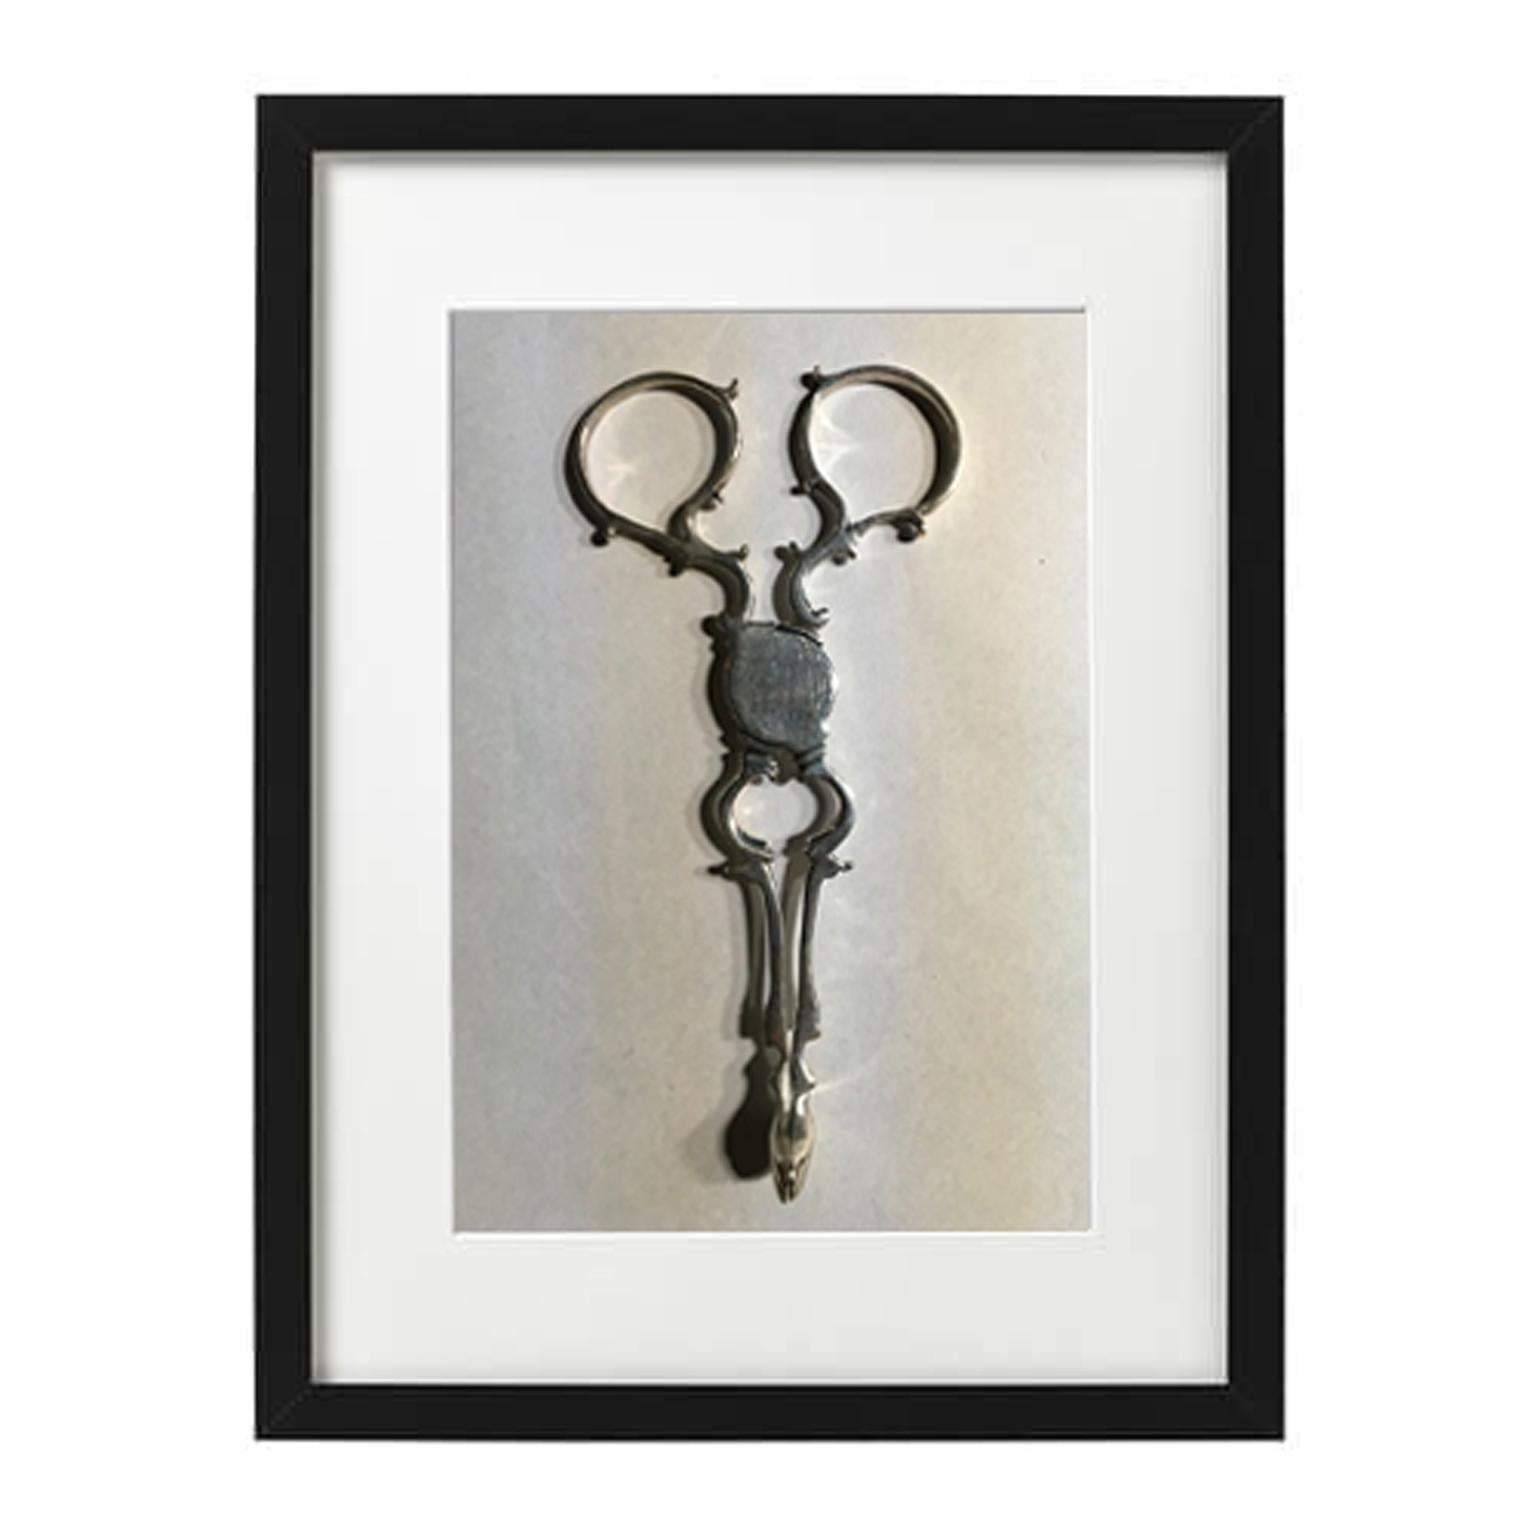 England, London  18th Century pair of sterling silver sugar nips put in wooden black frames with glass. The wooden frames are a contemporary production of  21st Century

This pair of beautiful 18th Century sterling silver sugar nips is  useful to